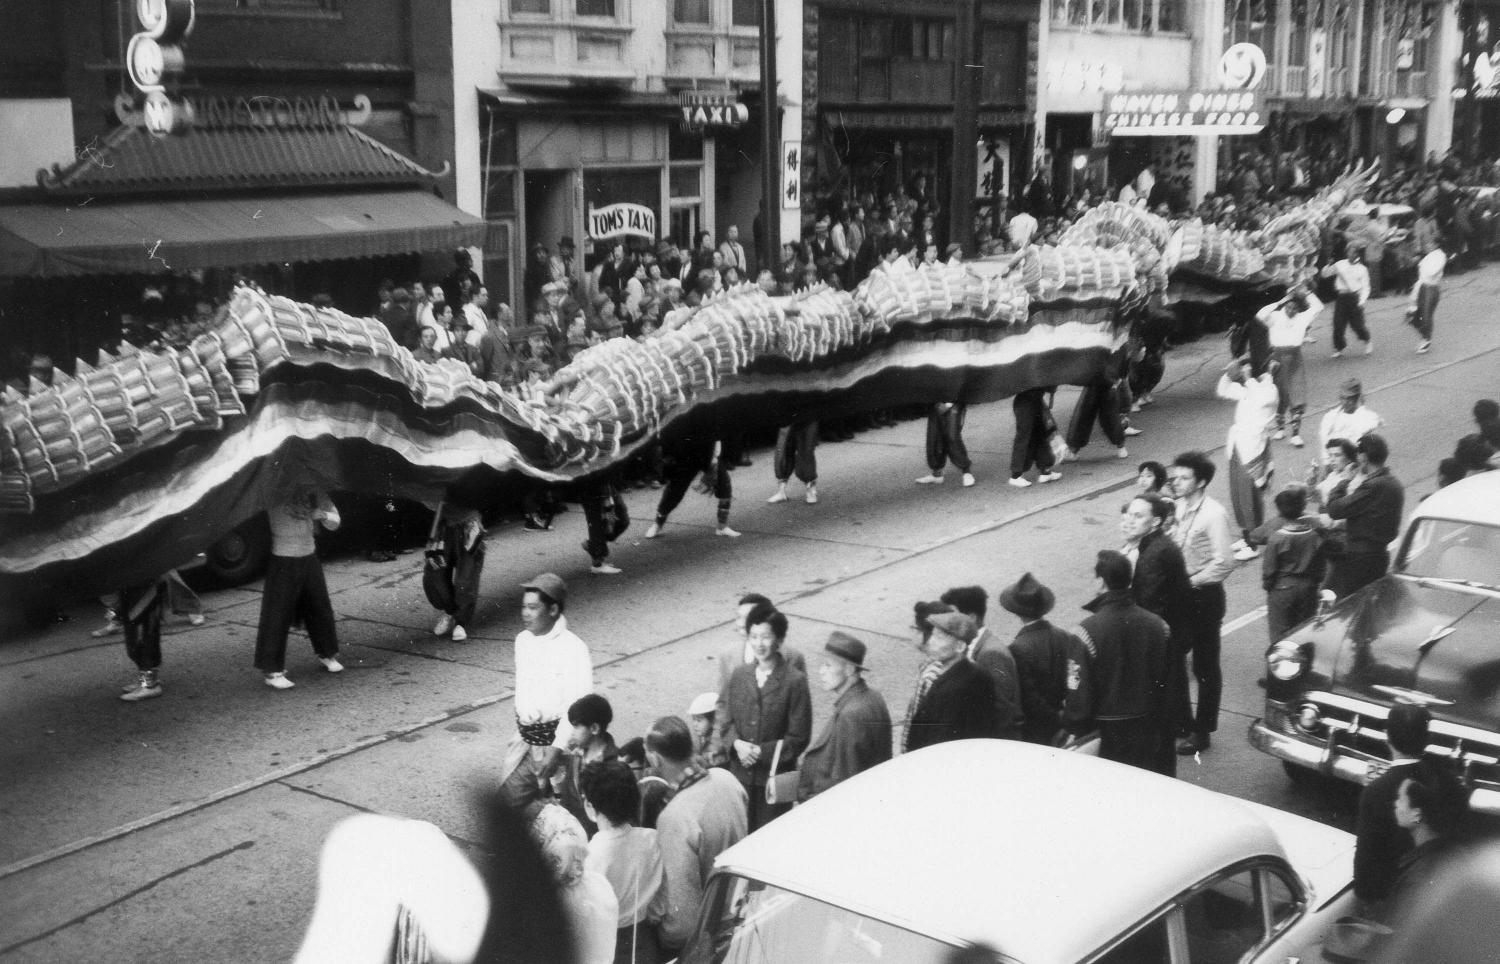 Parade in Chinatown in 1960.